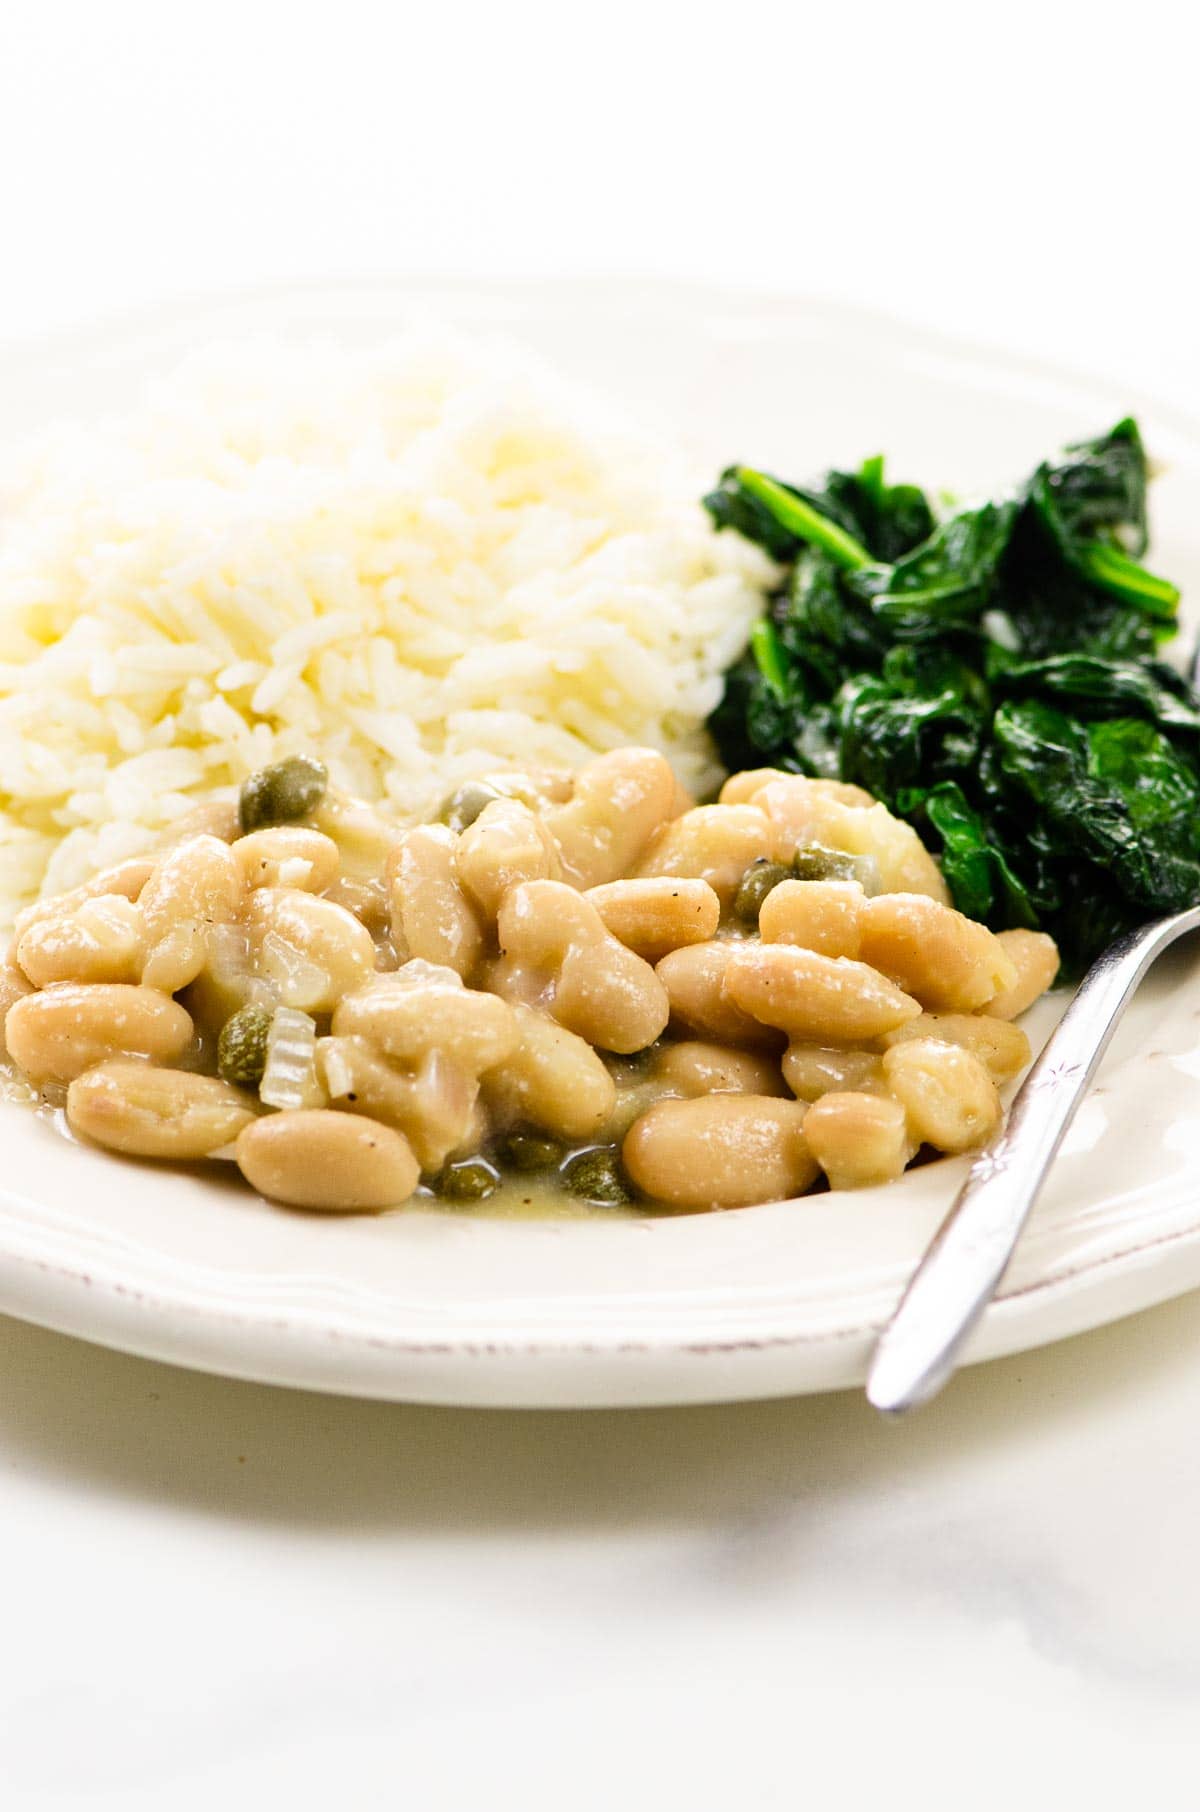 Garlicky Sauteed Spinach and Vegetarian Piccata with Cannellini Beans on a plate